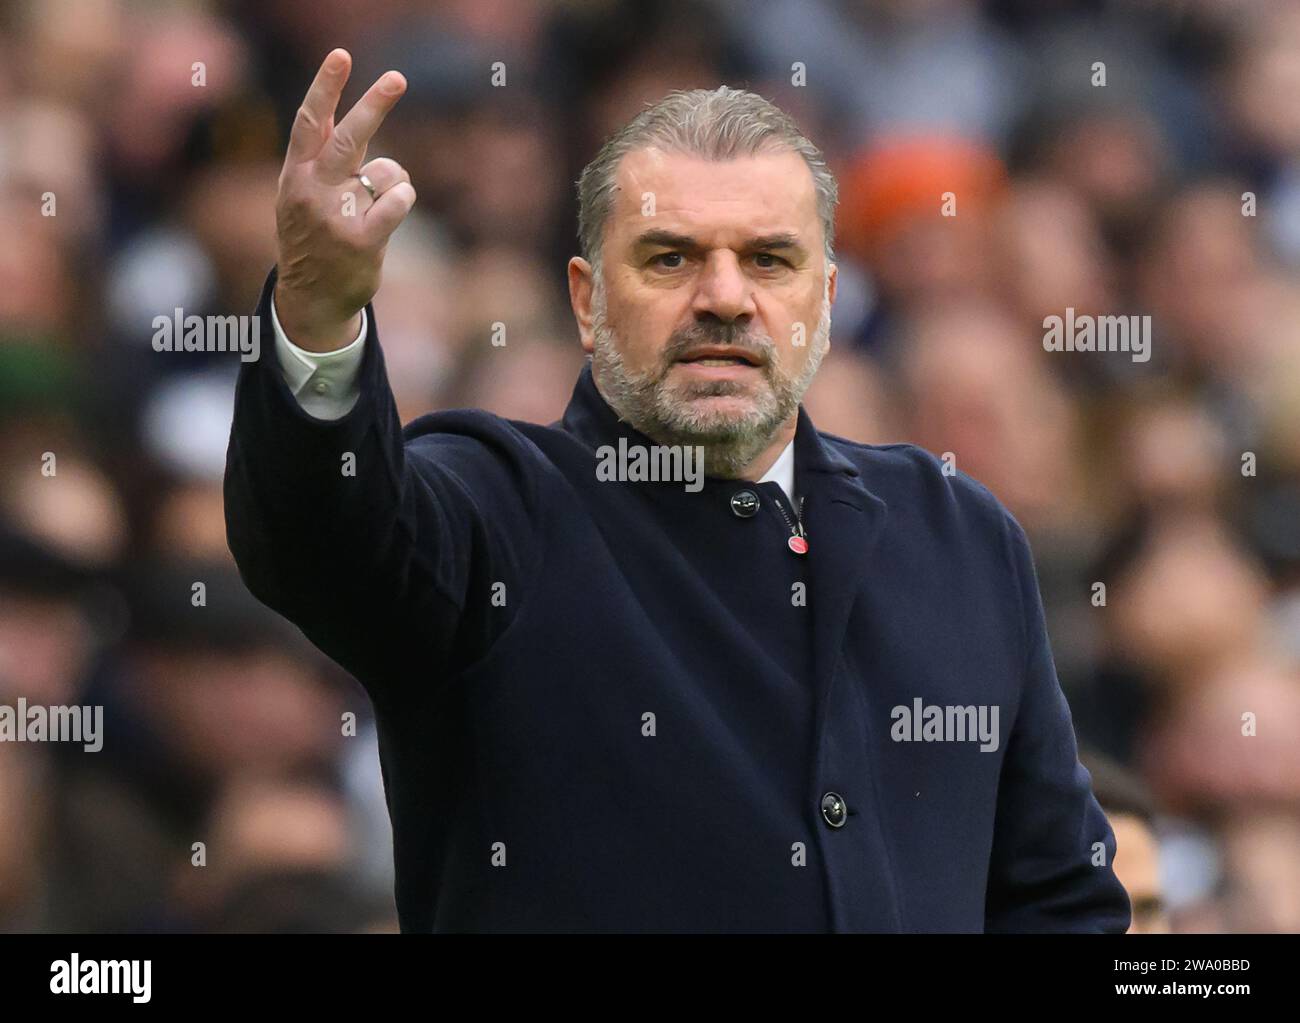 London, UK. 31st Dec, 2023. 31 Dec 2023 - Tottenham Hotspur v AFC Bournemouth - Premier League - Tottenham Hotspur Stadium.   Tottenham Manager Ange Postecoglou shows referee Simon Hooper what he thinks of one of his decisions during the match against Bournemouth.                                                                                Picture Credit: Mark Pain / Alamy Live News Stock Photo